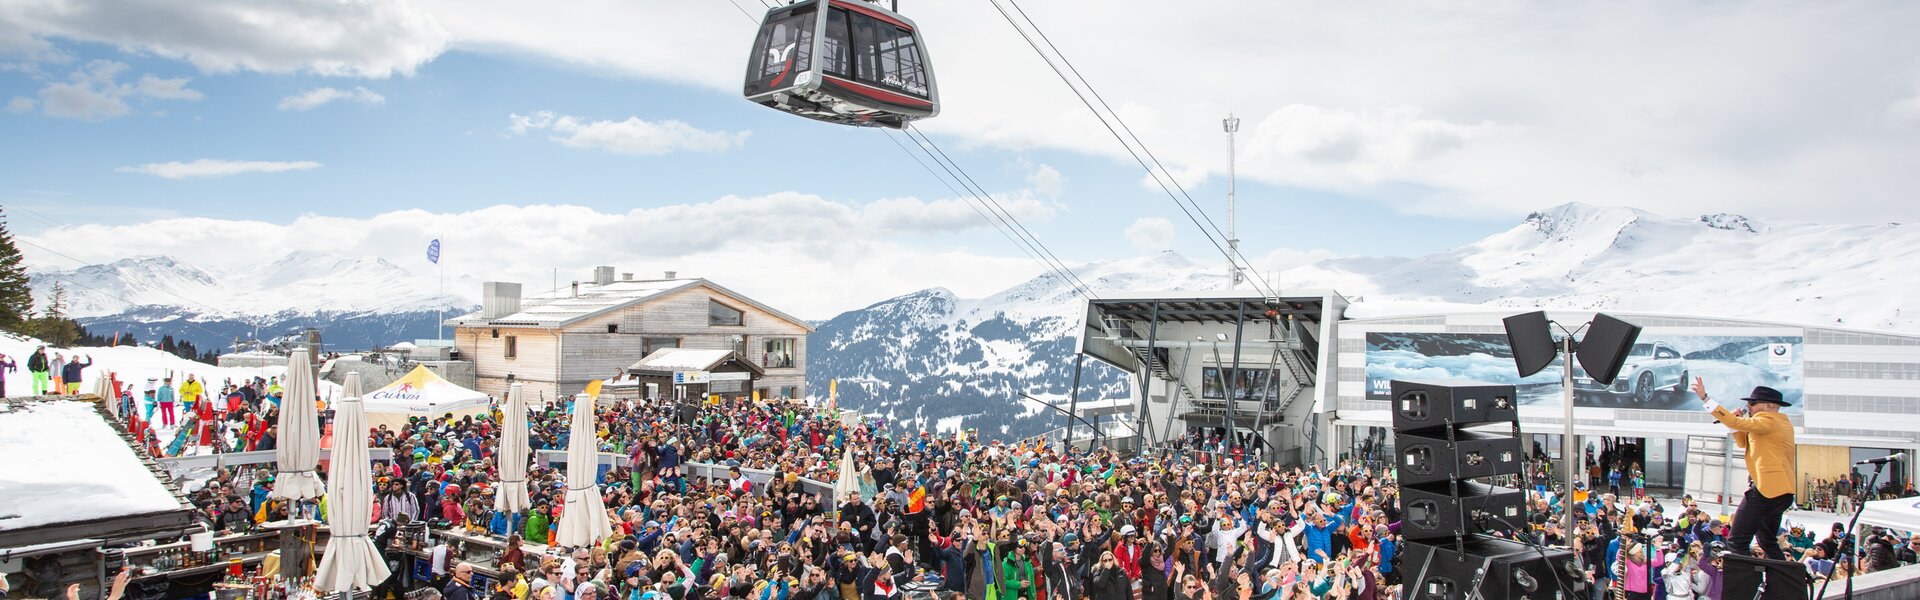 music live event in Arosa | © LIVE is LIFE